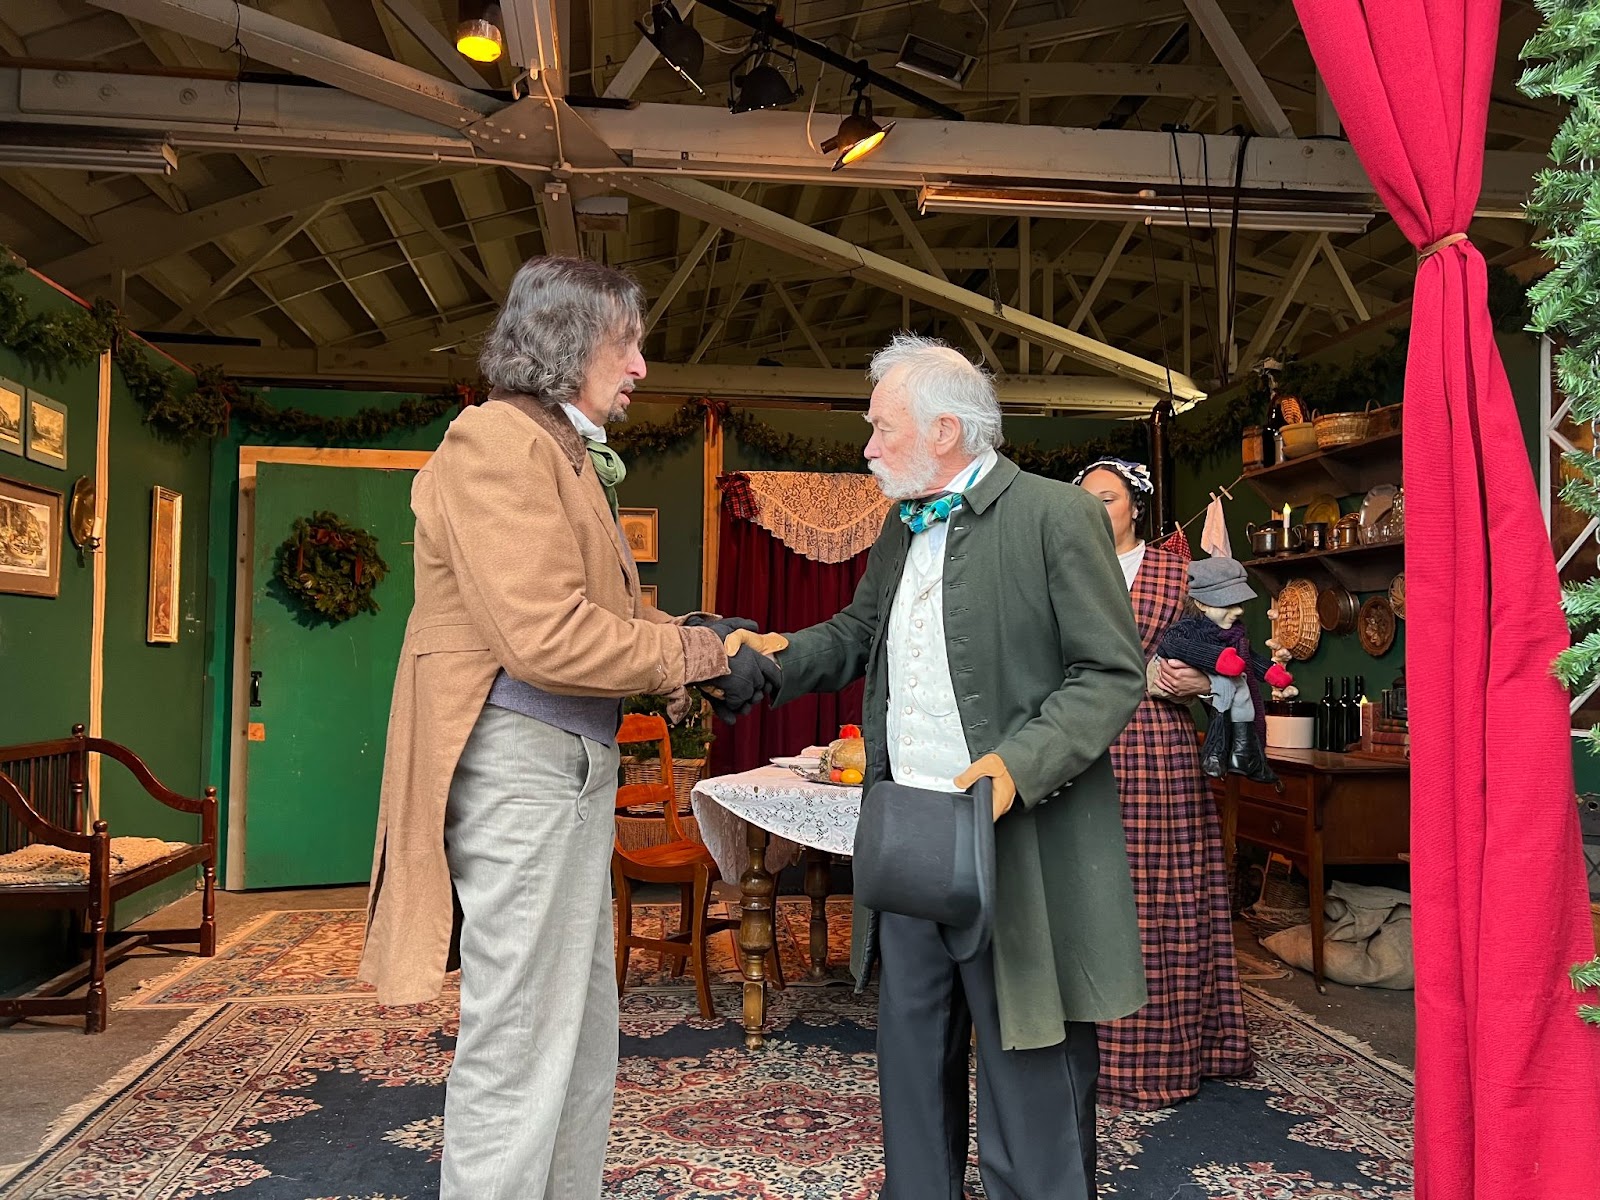 On stage, a man dressed as Dickens' Bob Cratchit shakes the hand of another man dressed as Ebenezer Scrooge.